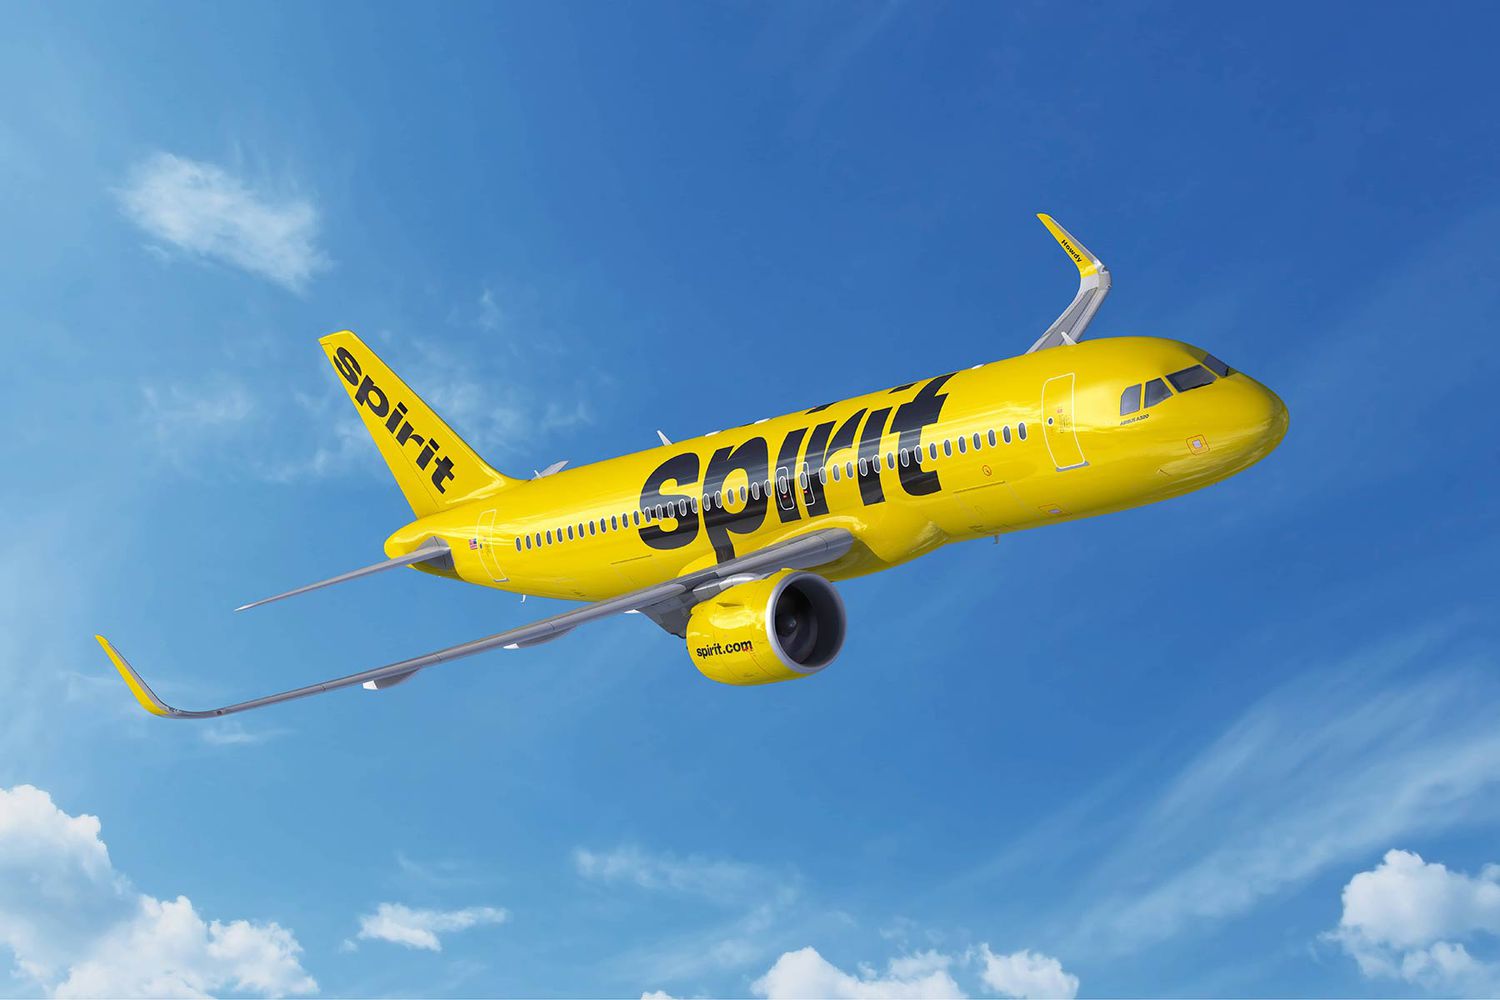 How to Modify a Spirit Airlines Flight